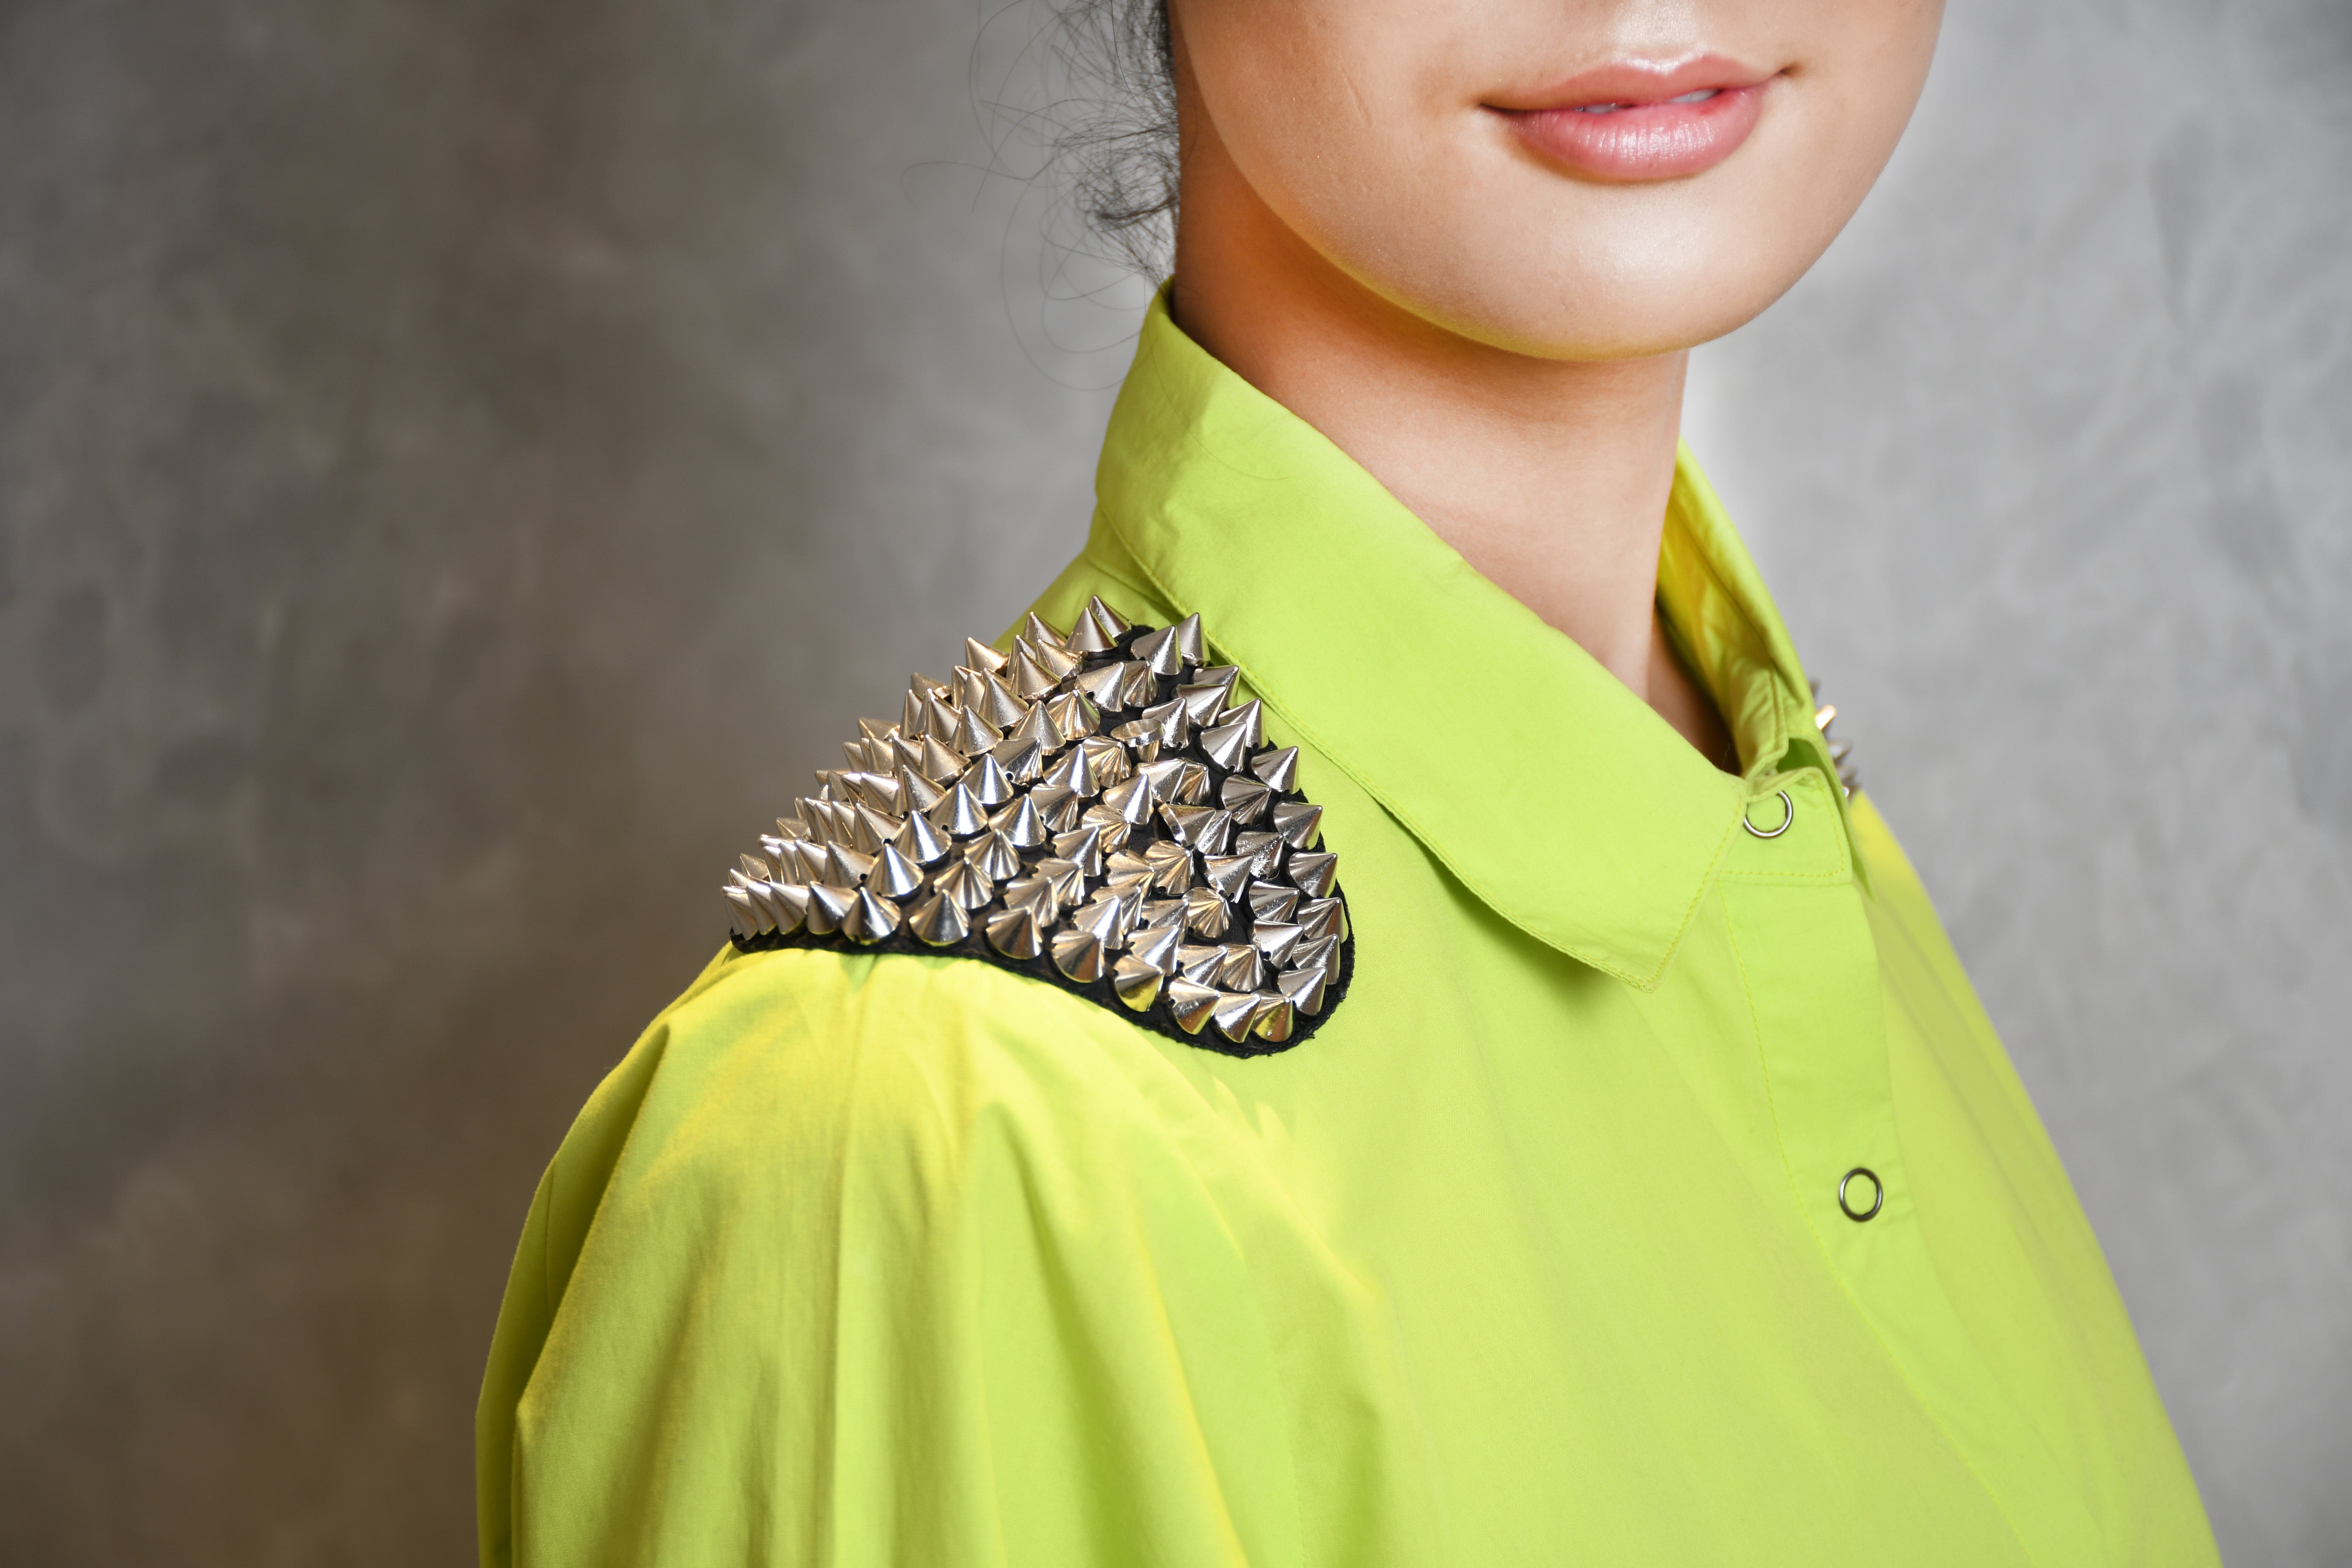 NEON GREEN SHIRT WITH SILVER SPIKE SHOULDER PATCH,TAPE DETAILINGS